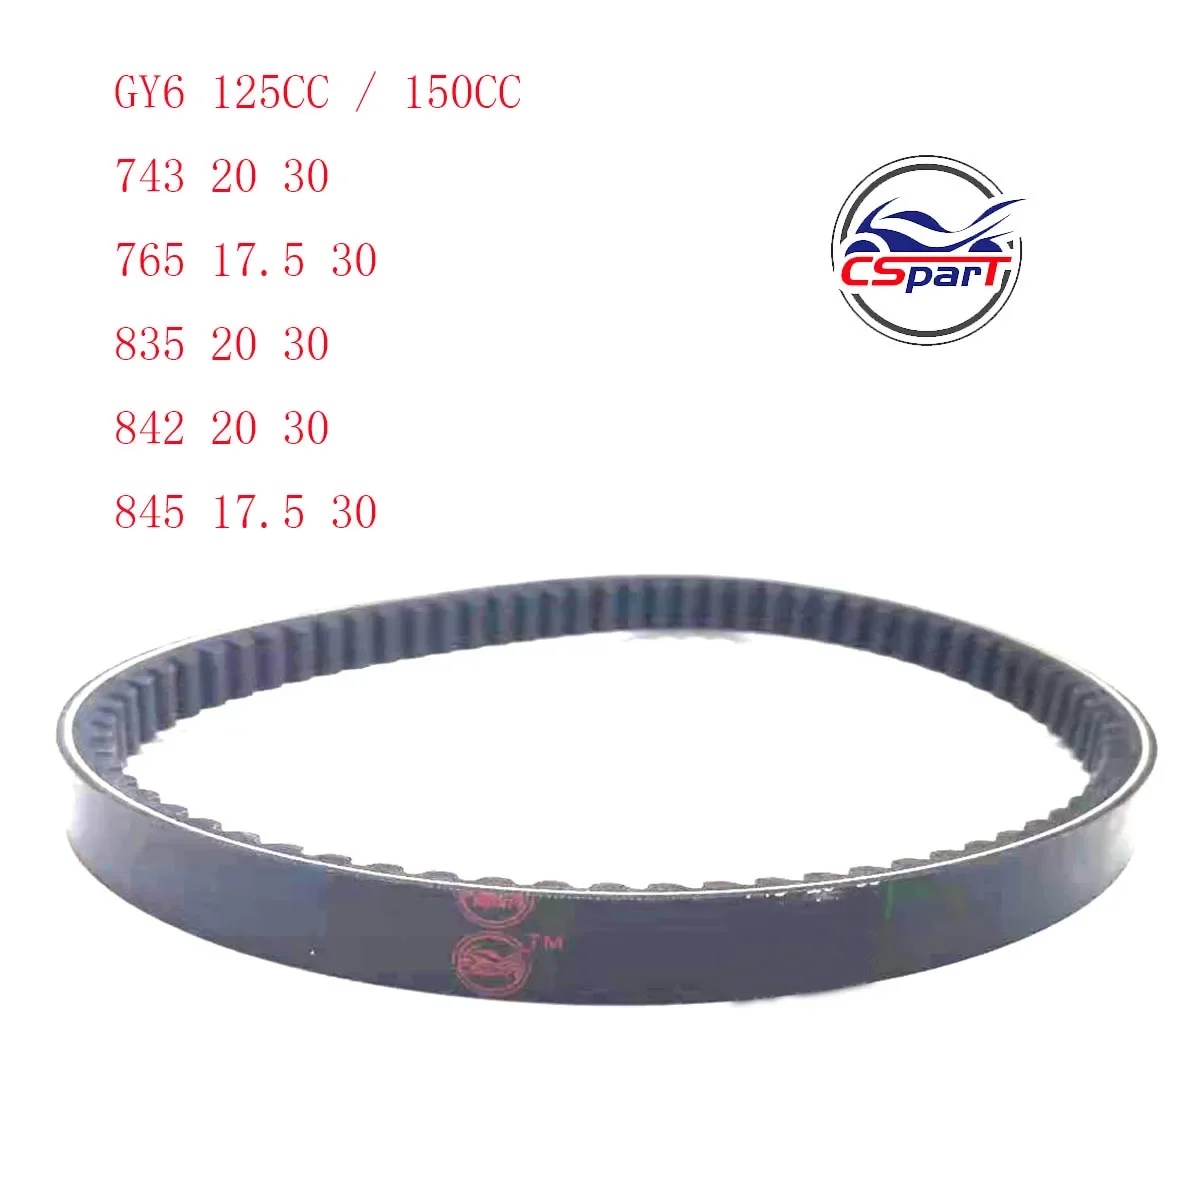 3 PACKS 835 20 30 Drive Belt fits GY6 125cc 150cc Scooter Motorcycle ATV Go  Kart